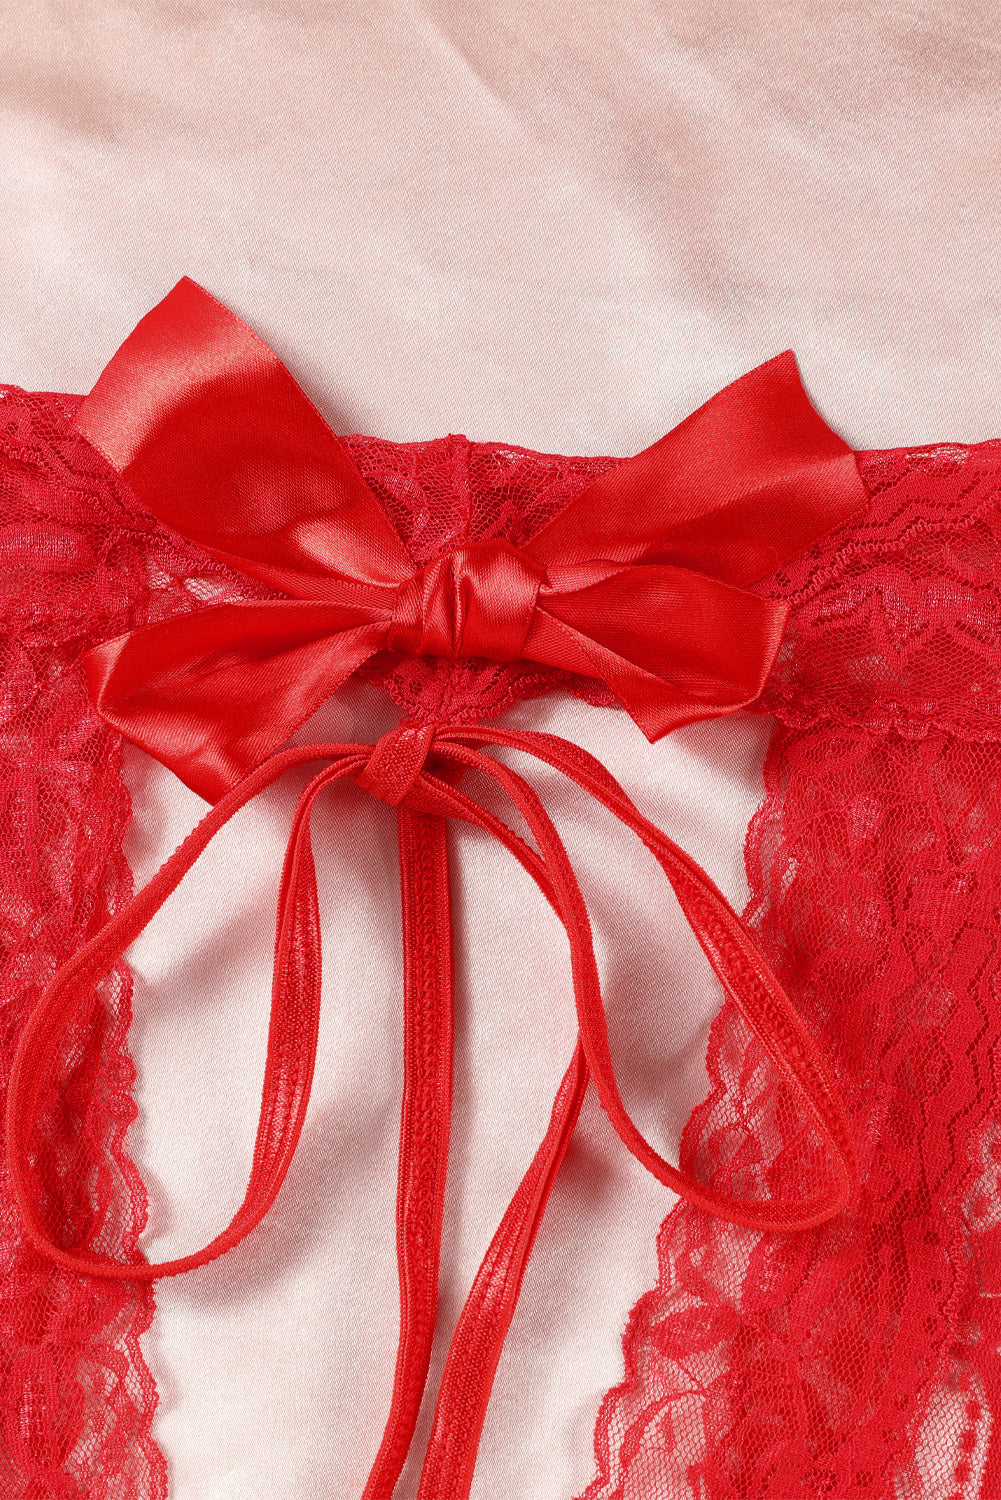 Red Bow Knot Cut Out Lace Teddy Lingerie